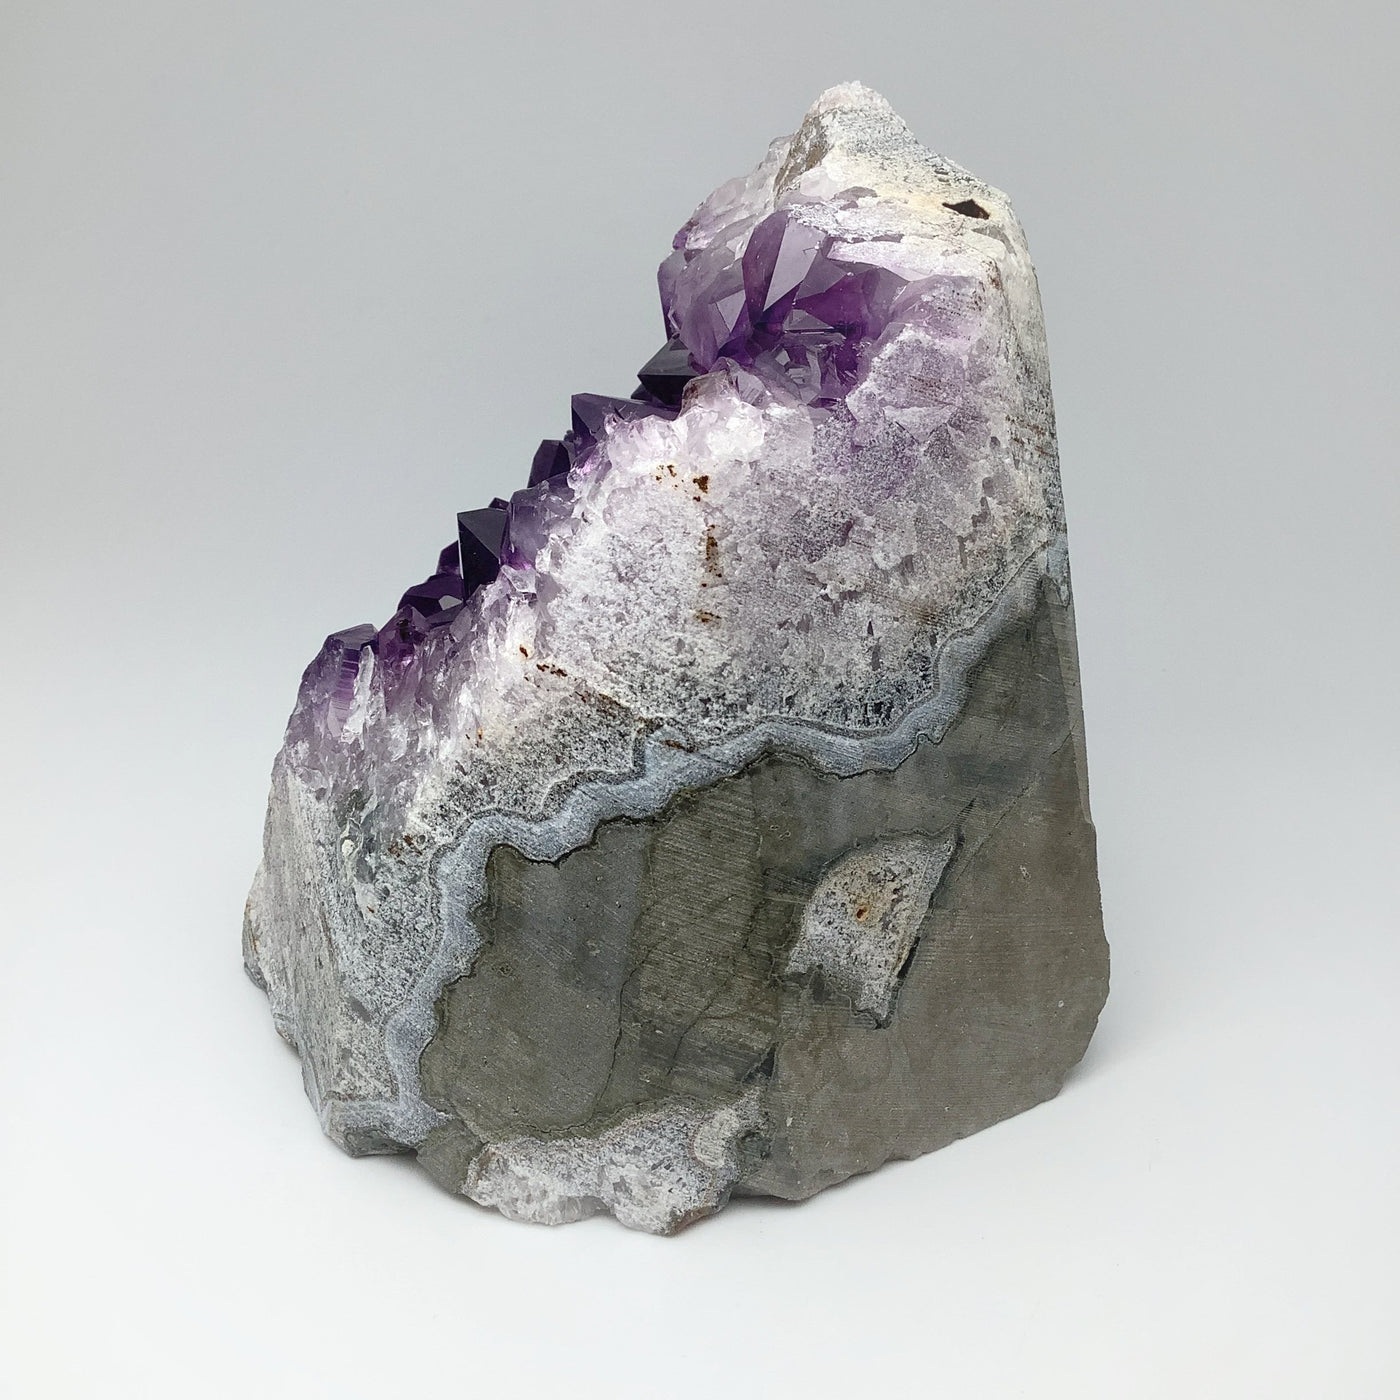 Amethyst Druze Cluster Stand Up